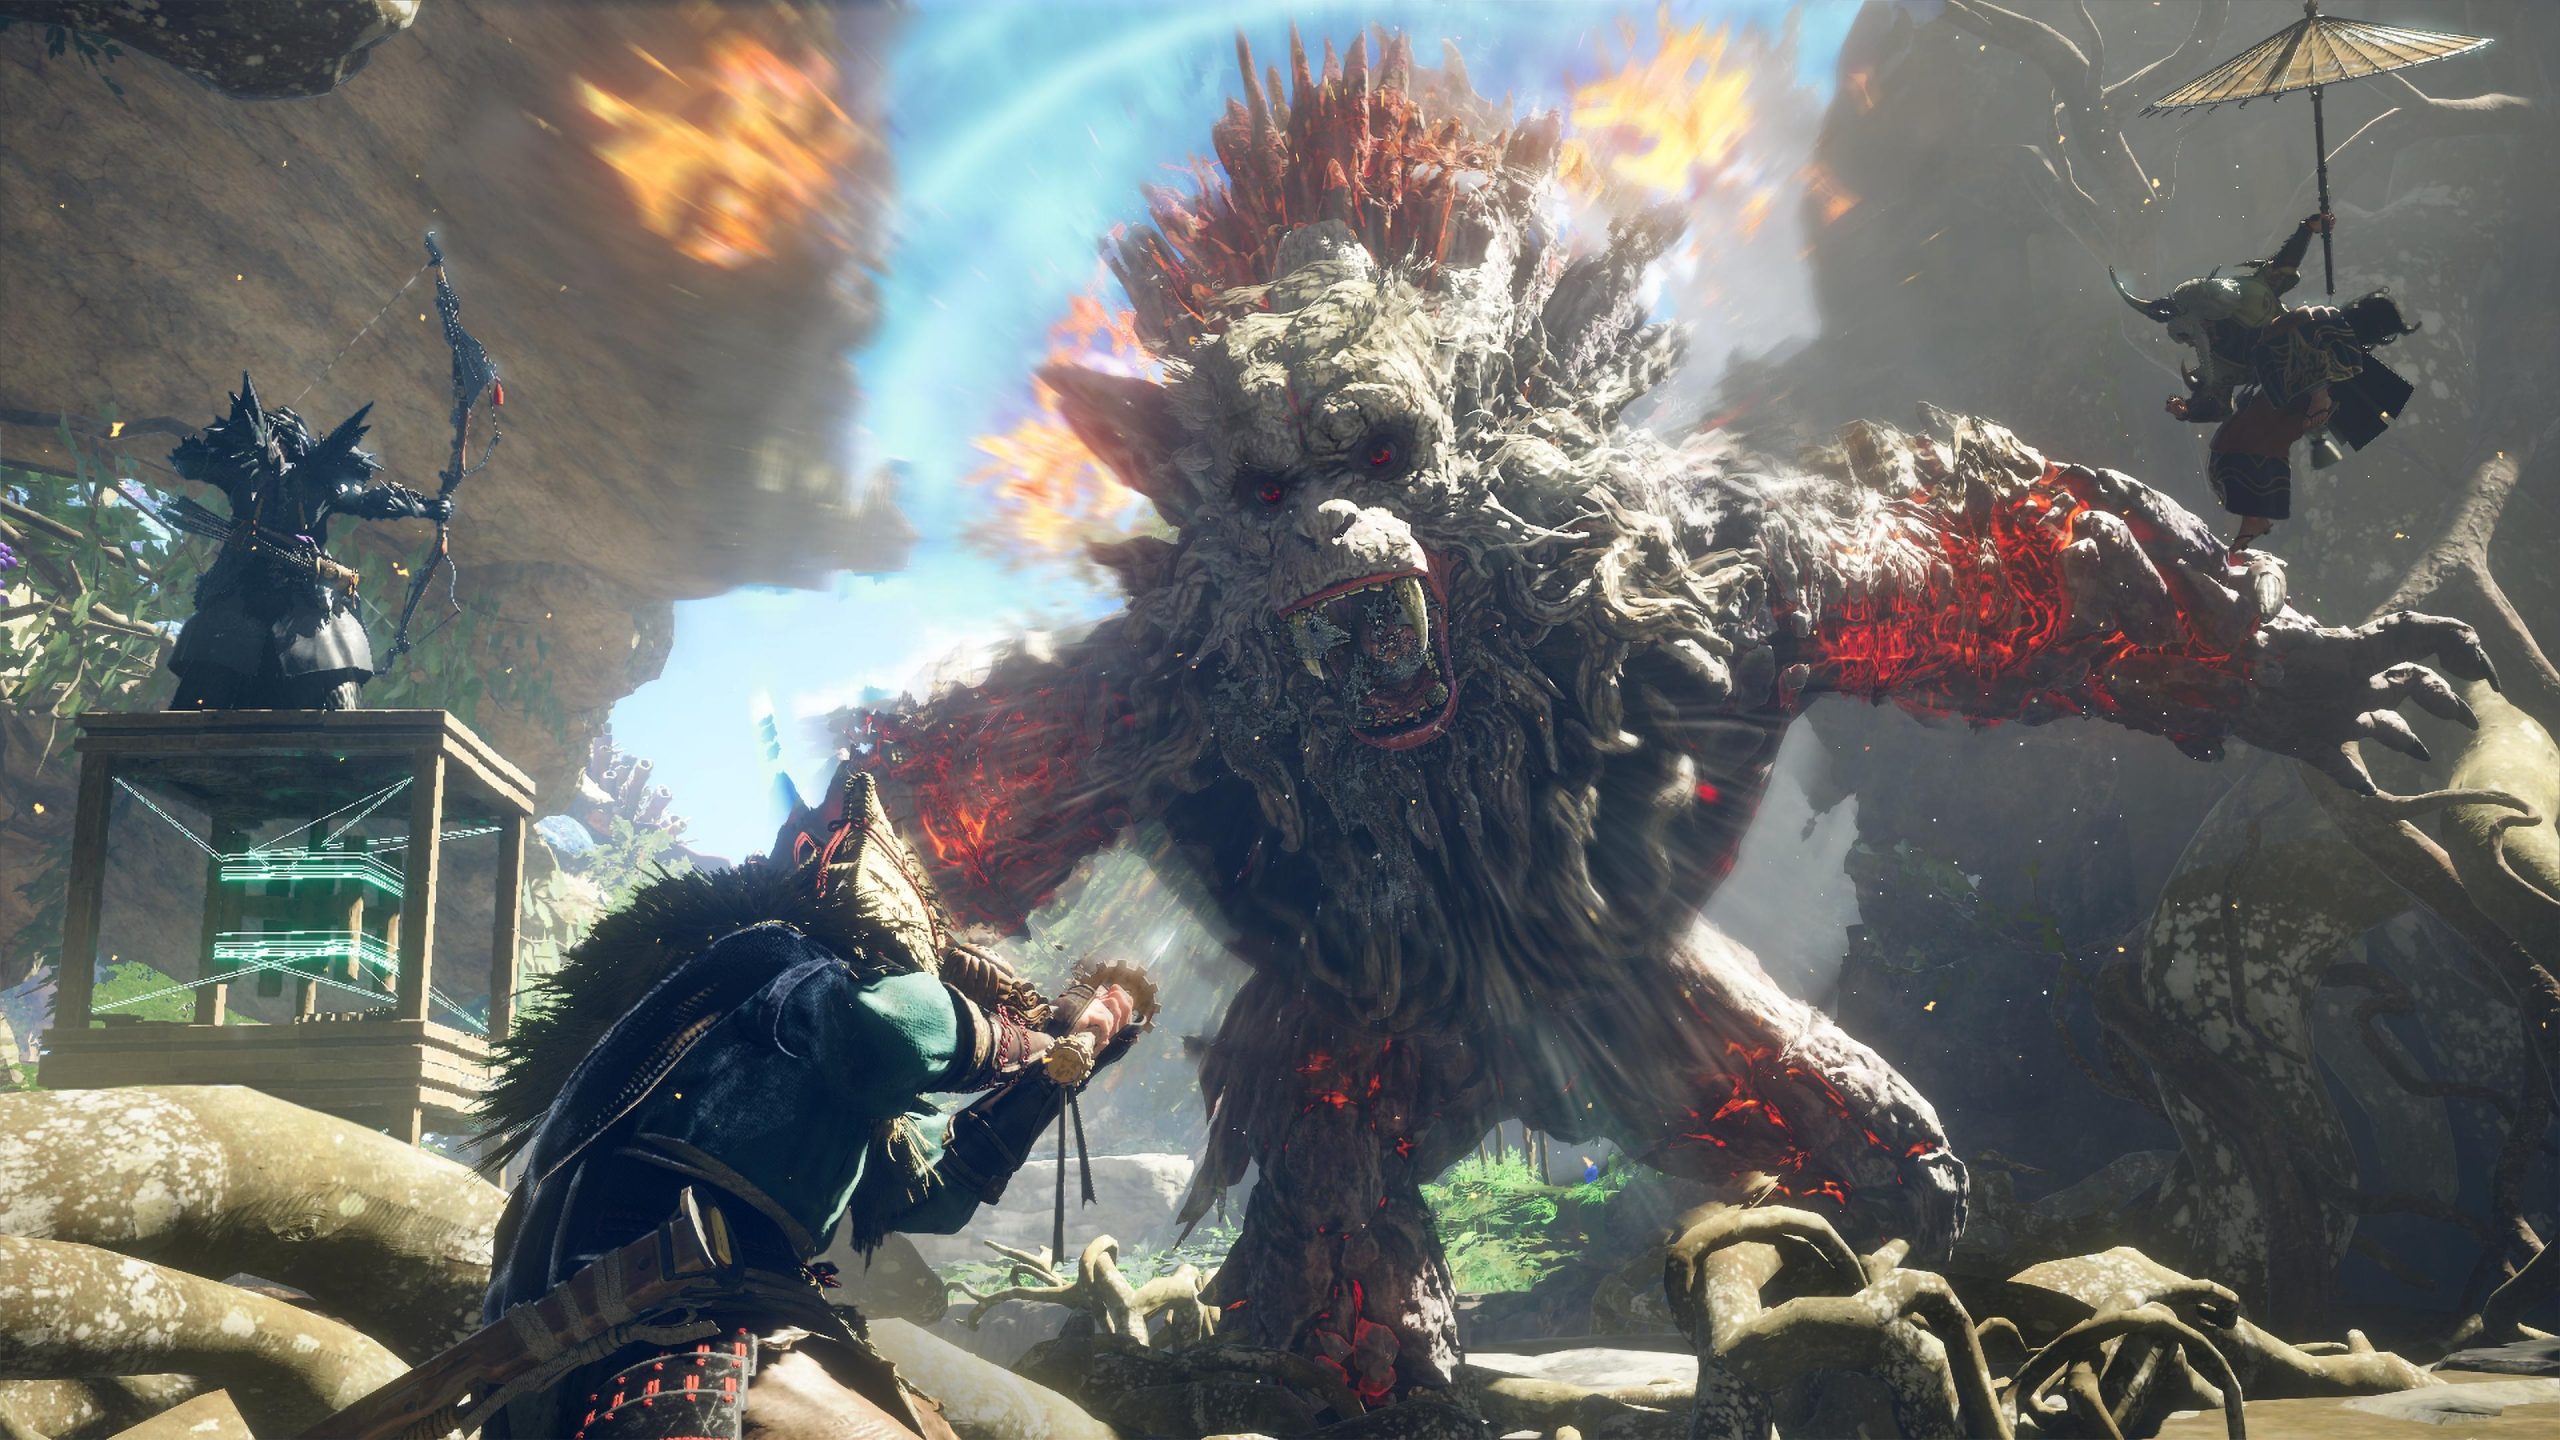 EA's New Multiplayer Monster-Hunting Game Wild Hearts Launches On